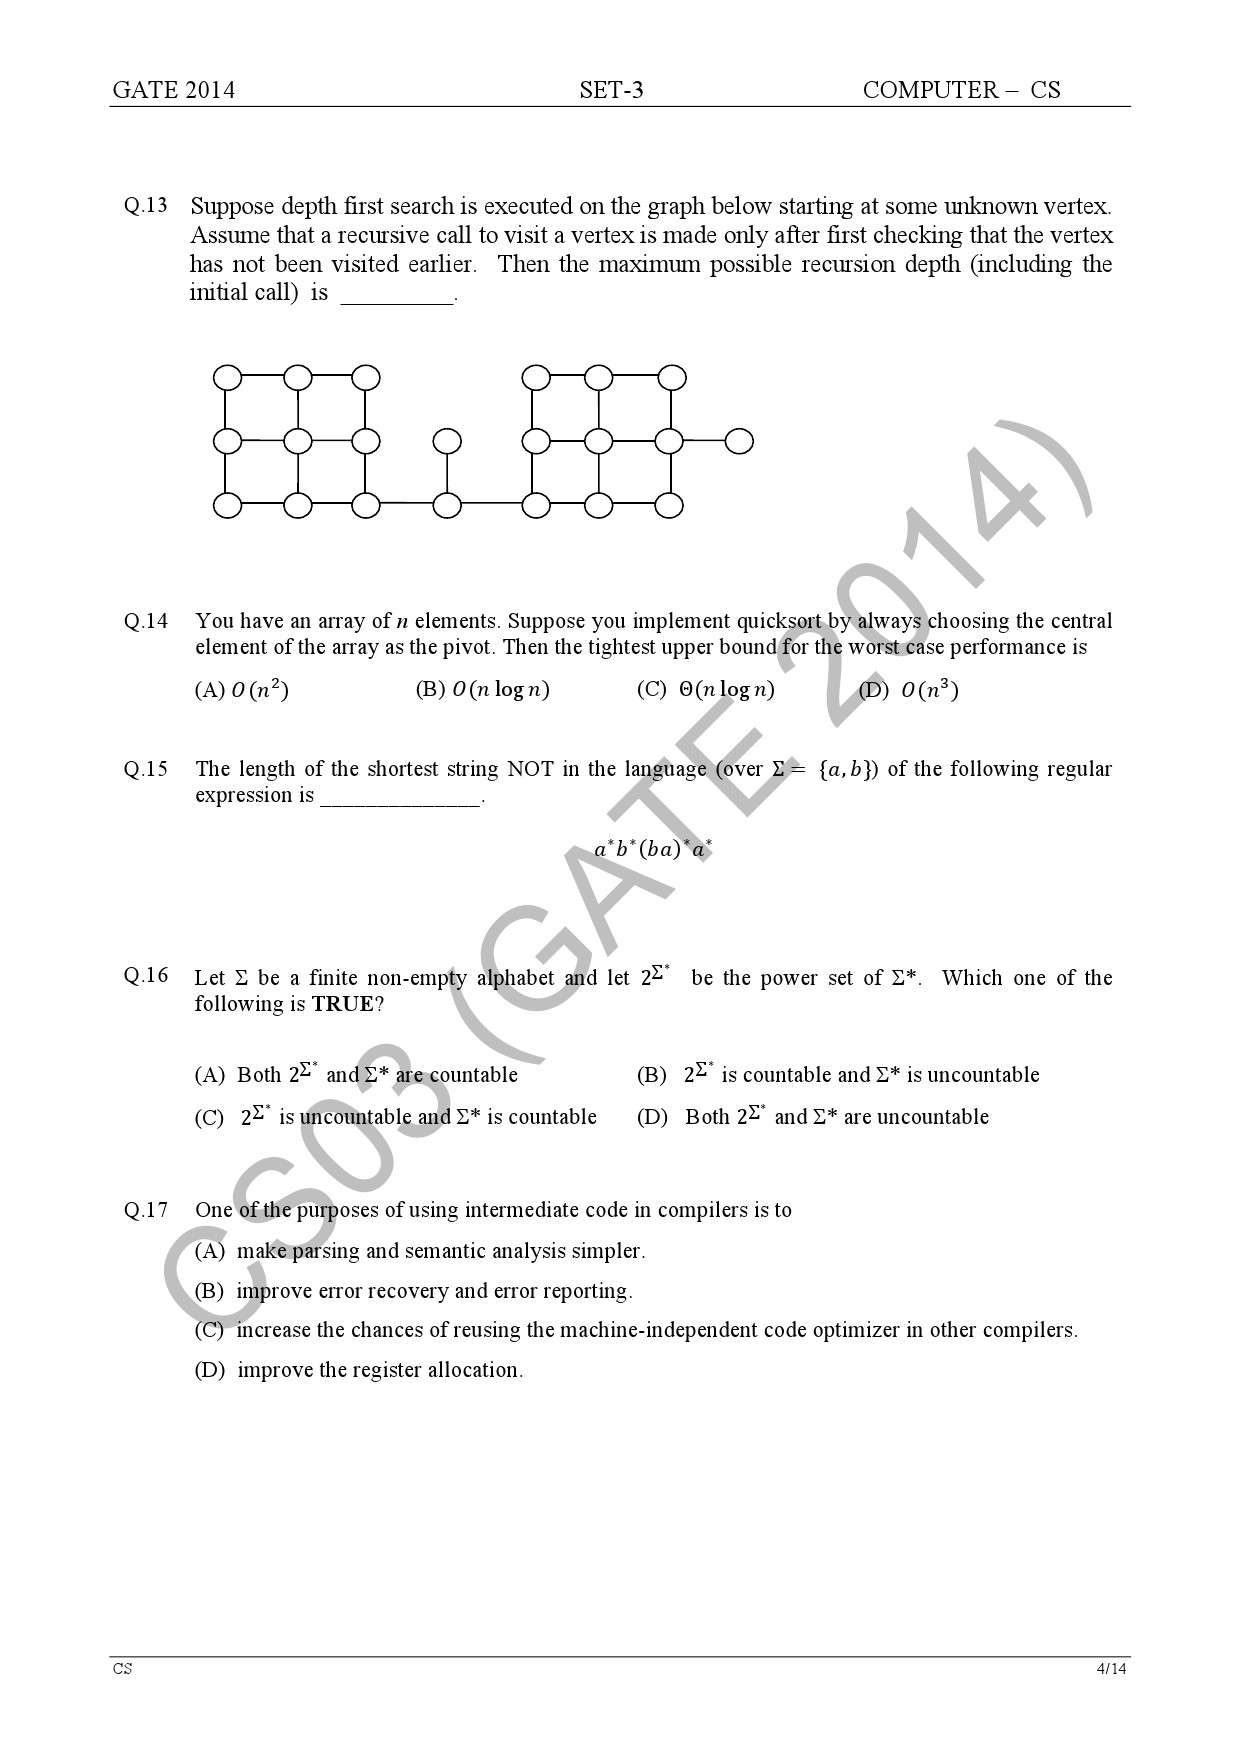 GATE Exam Question Paper 2014 Computer Science and Information Technology Set 3 10